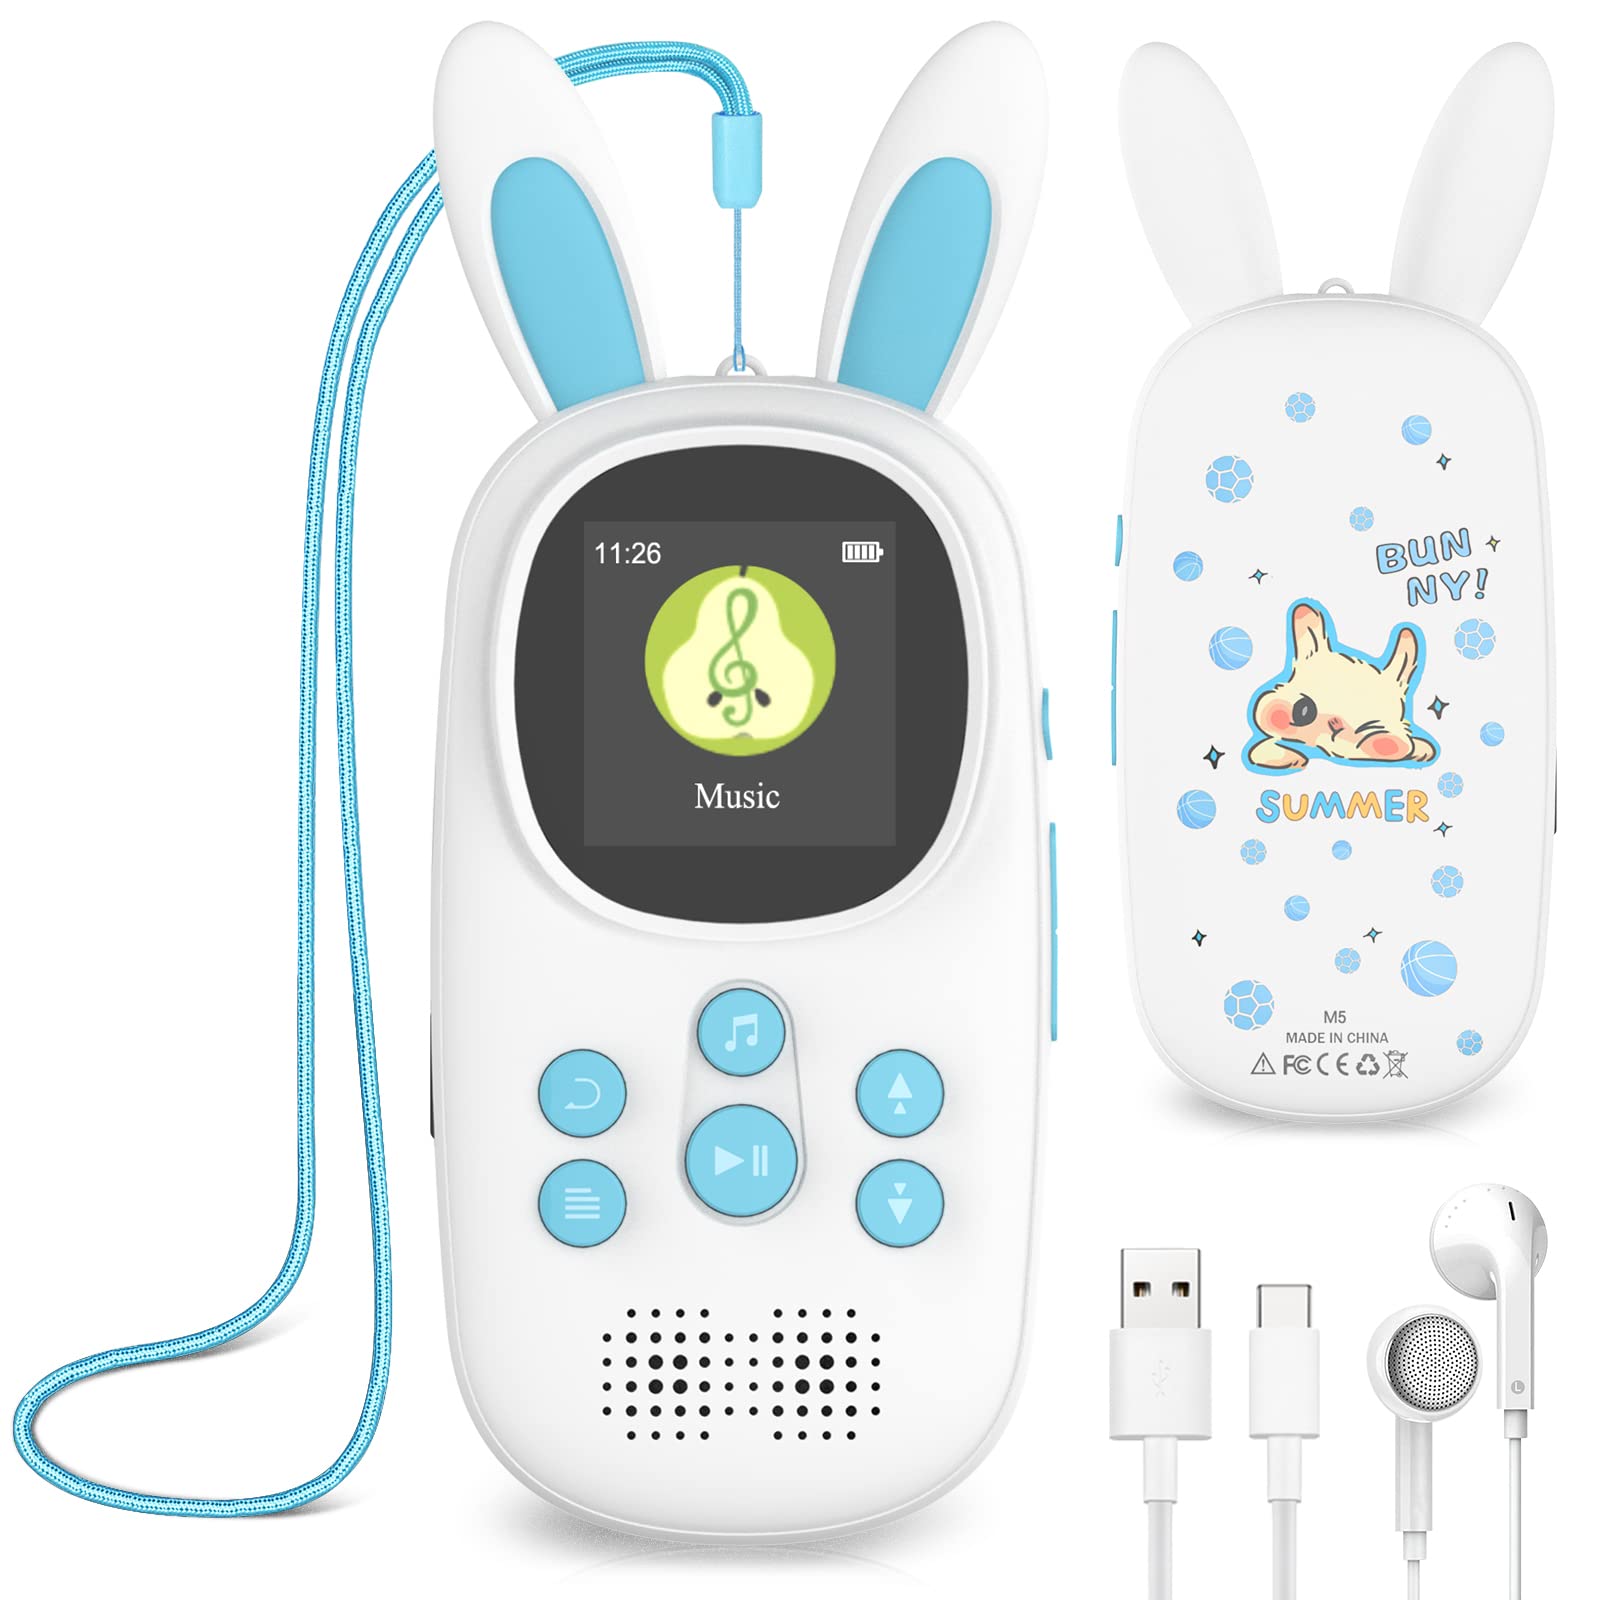 ChenFec 16GB Music MP3 Player for Kids, Cute Bunny Kids Music MP3 Player with Bluetooth, MP3 & MP4 Players with Speaker, MP3 Player with